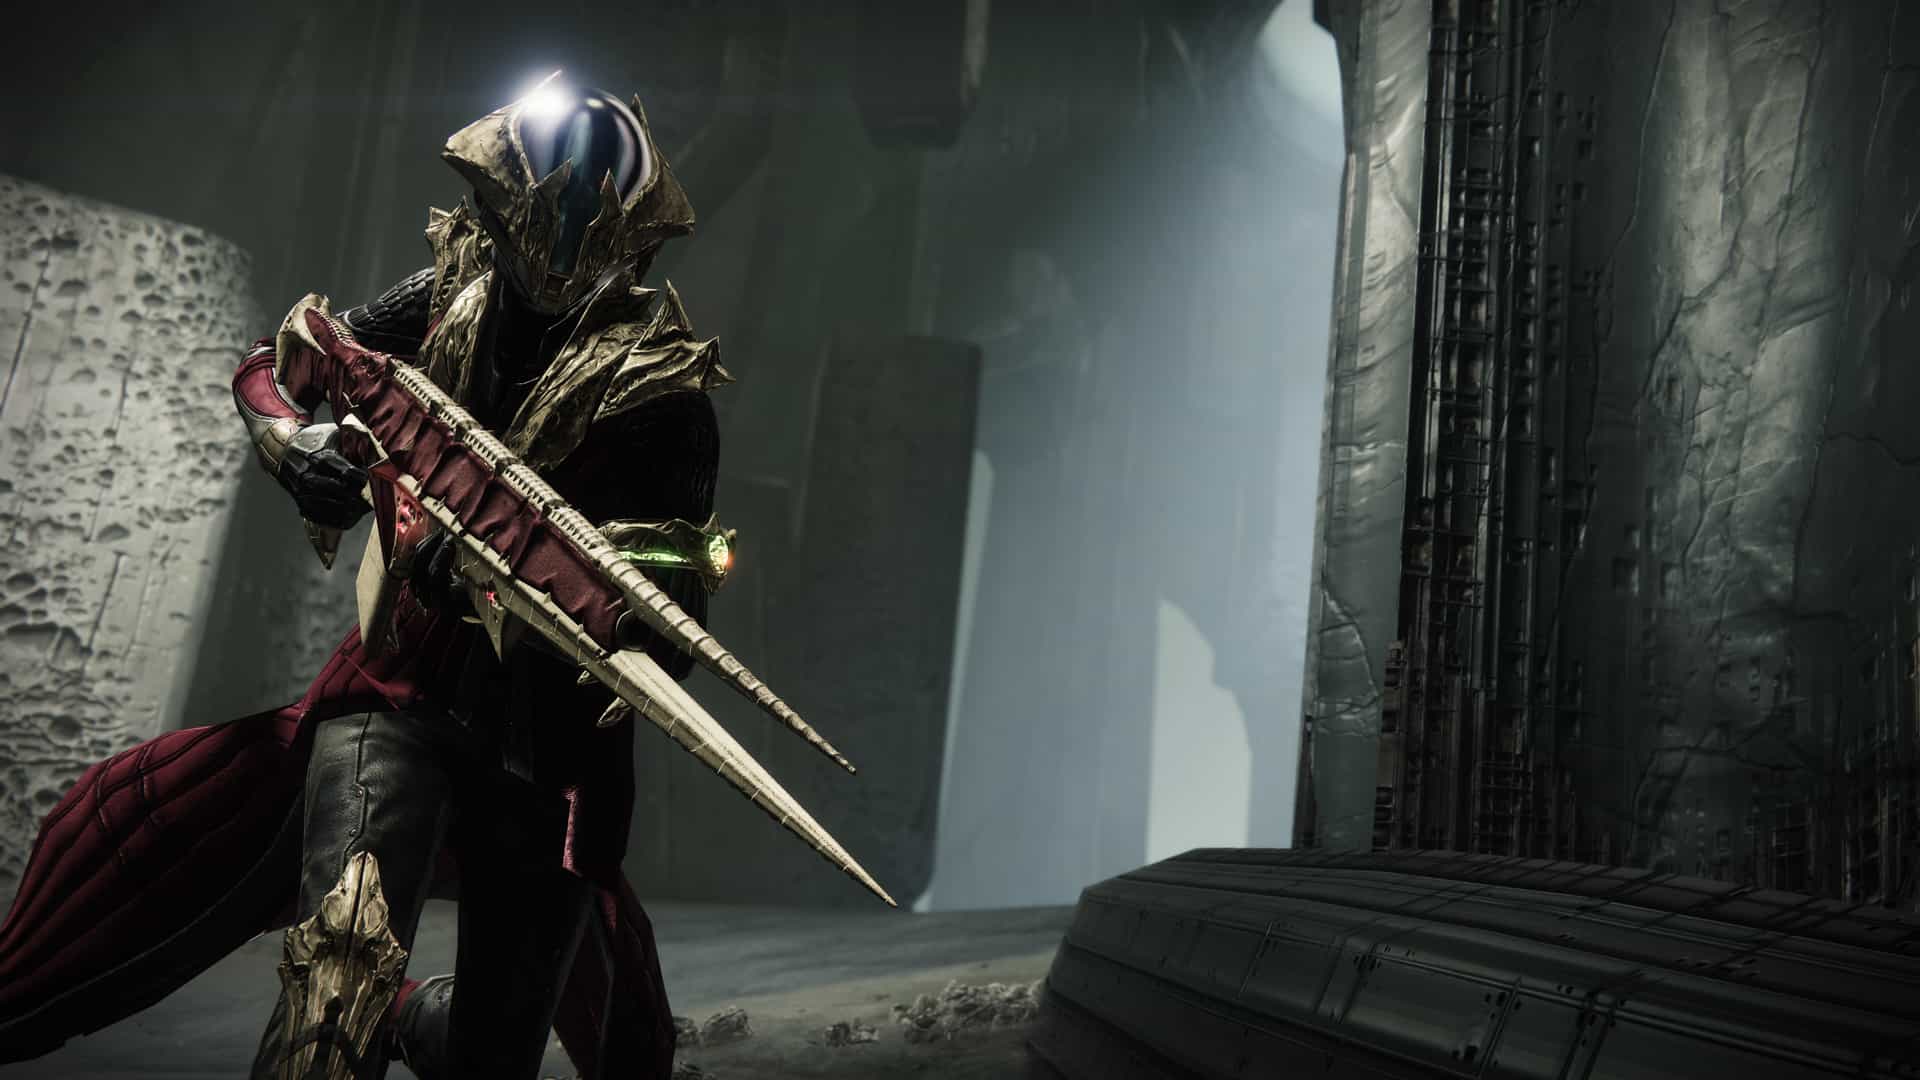 King's Fall Weapons featured Destiny 2